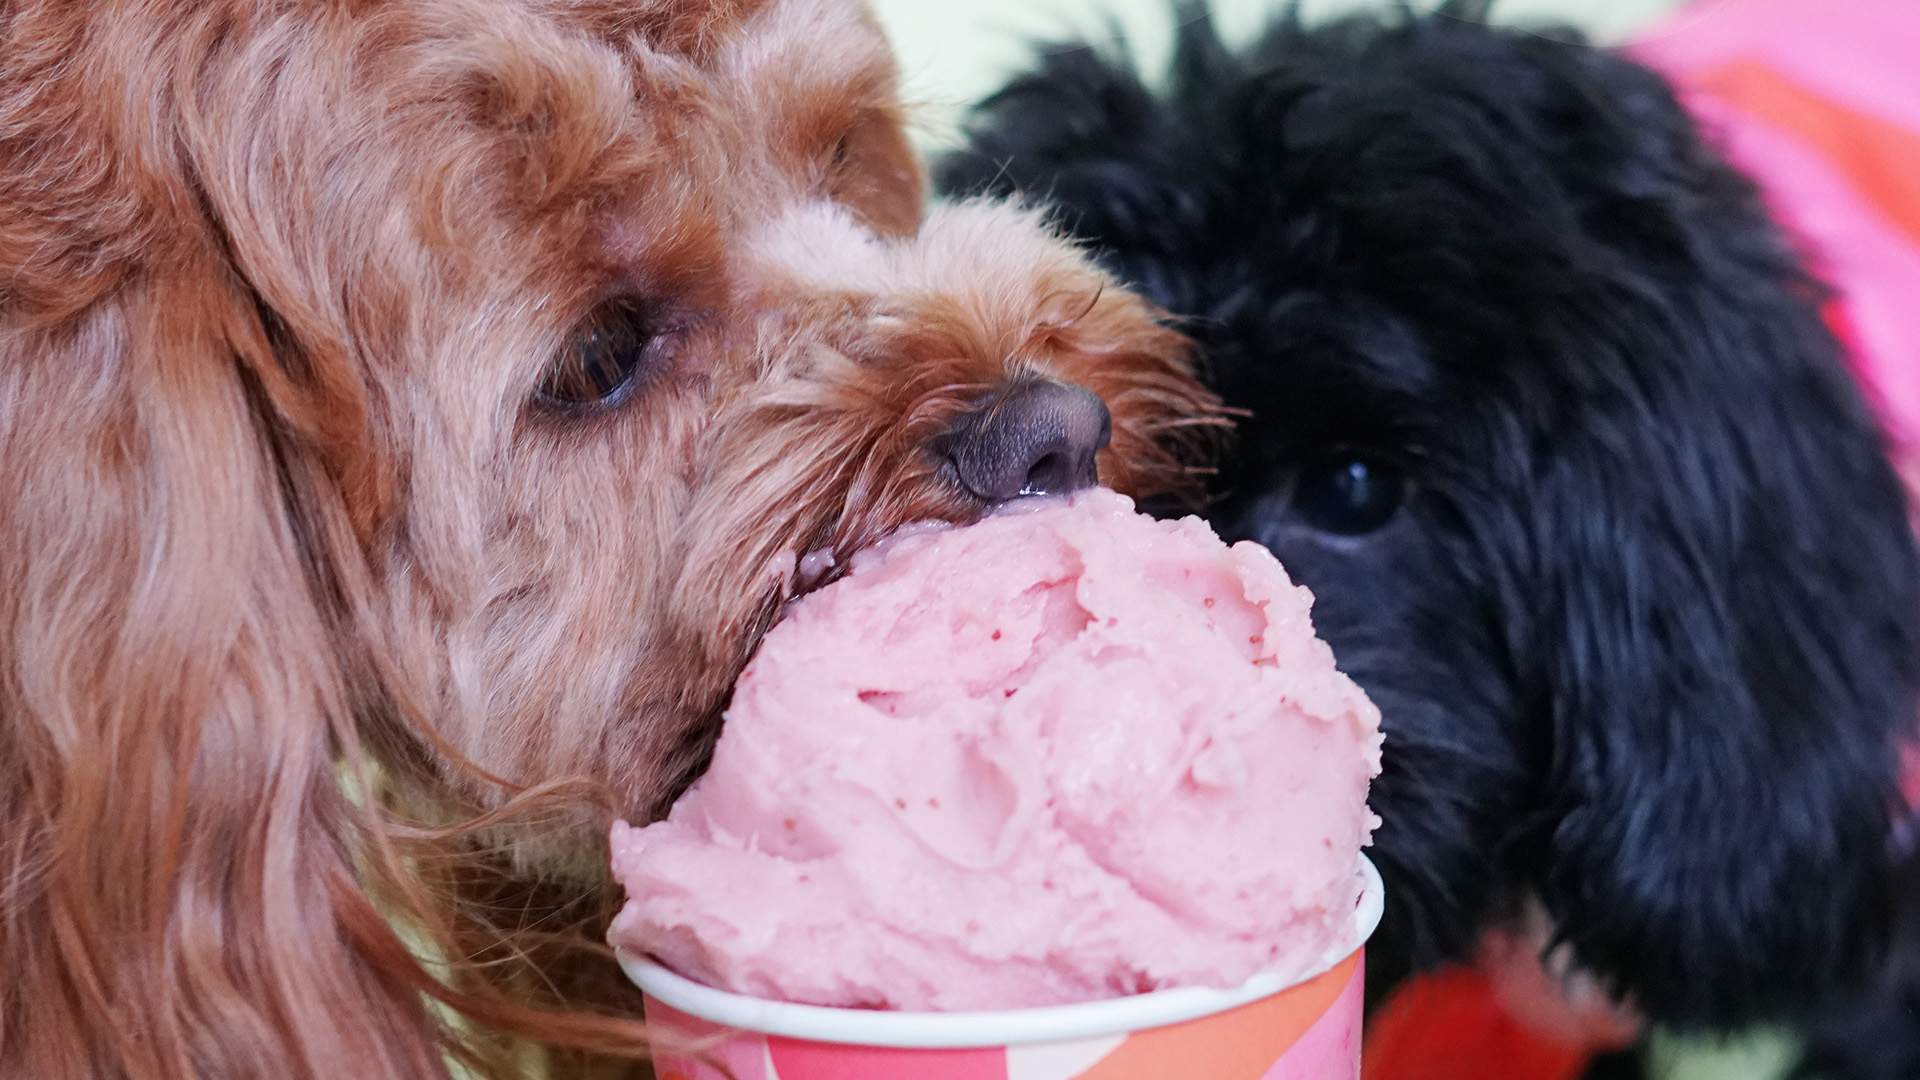 Gelatissimo Has Released a New Vegan Gelato Flavour That Humans and Dogs Can Share